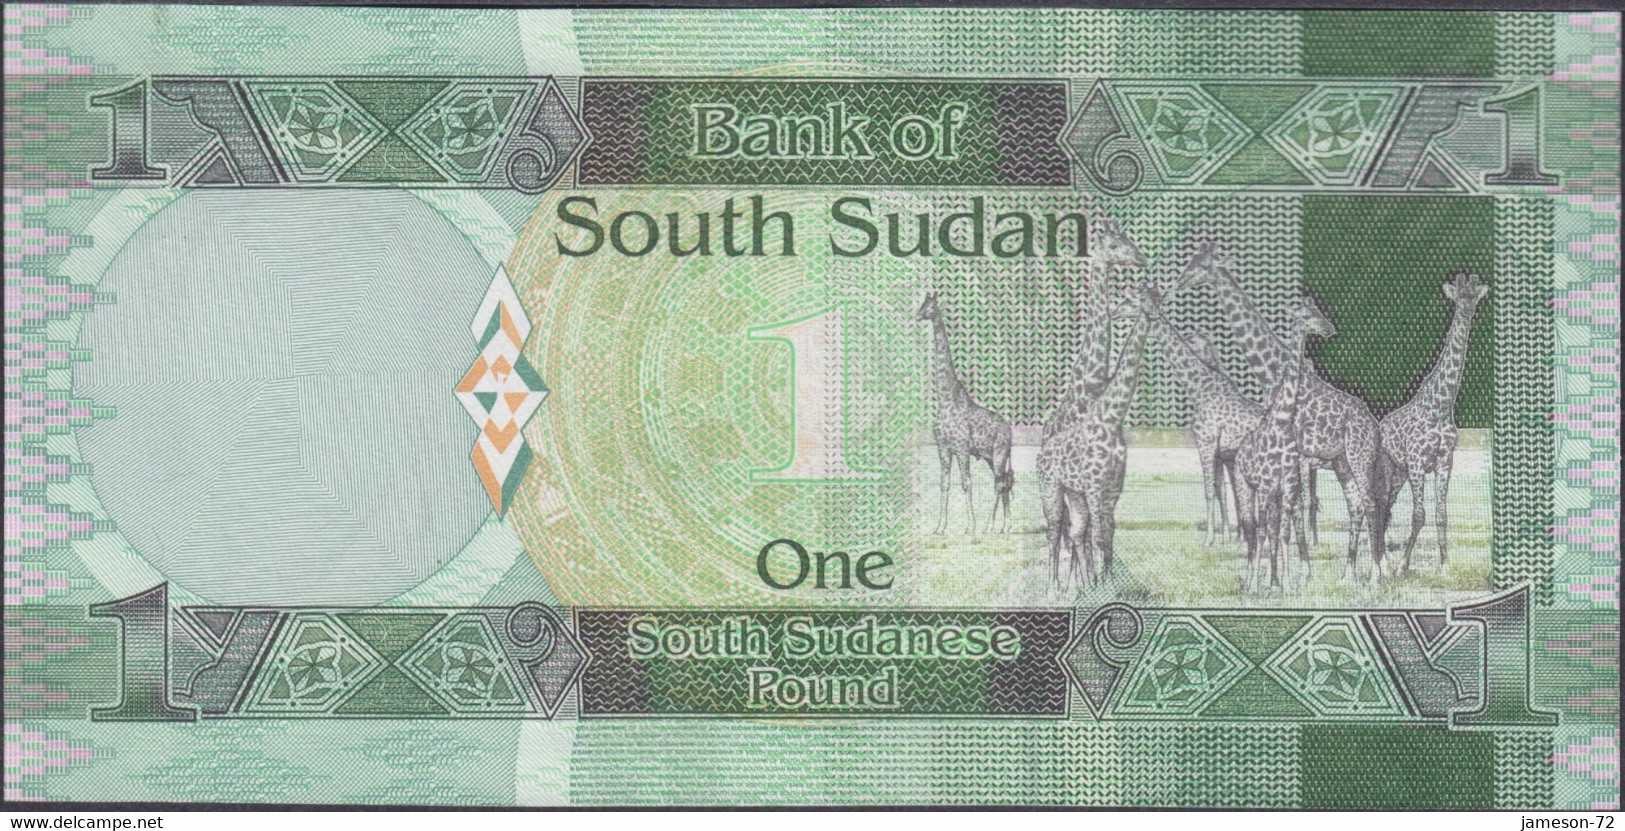 SOUTH SUDAN - 1 Pound ND (2011) KM# 4 Africa Banknote - Edelweiss Coins - Südsudan